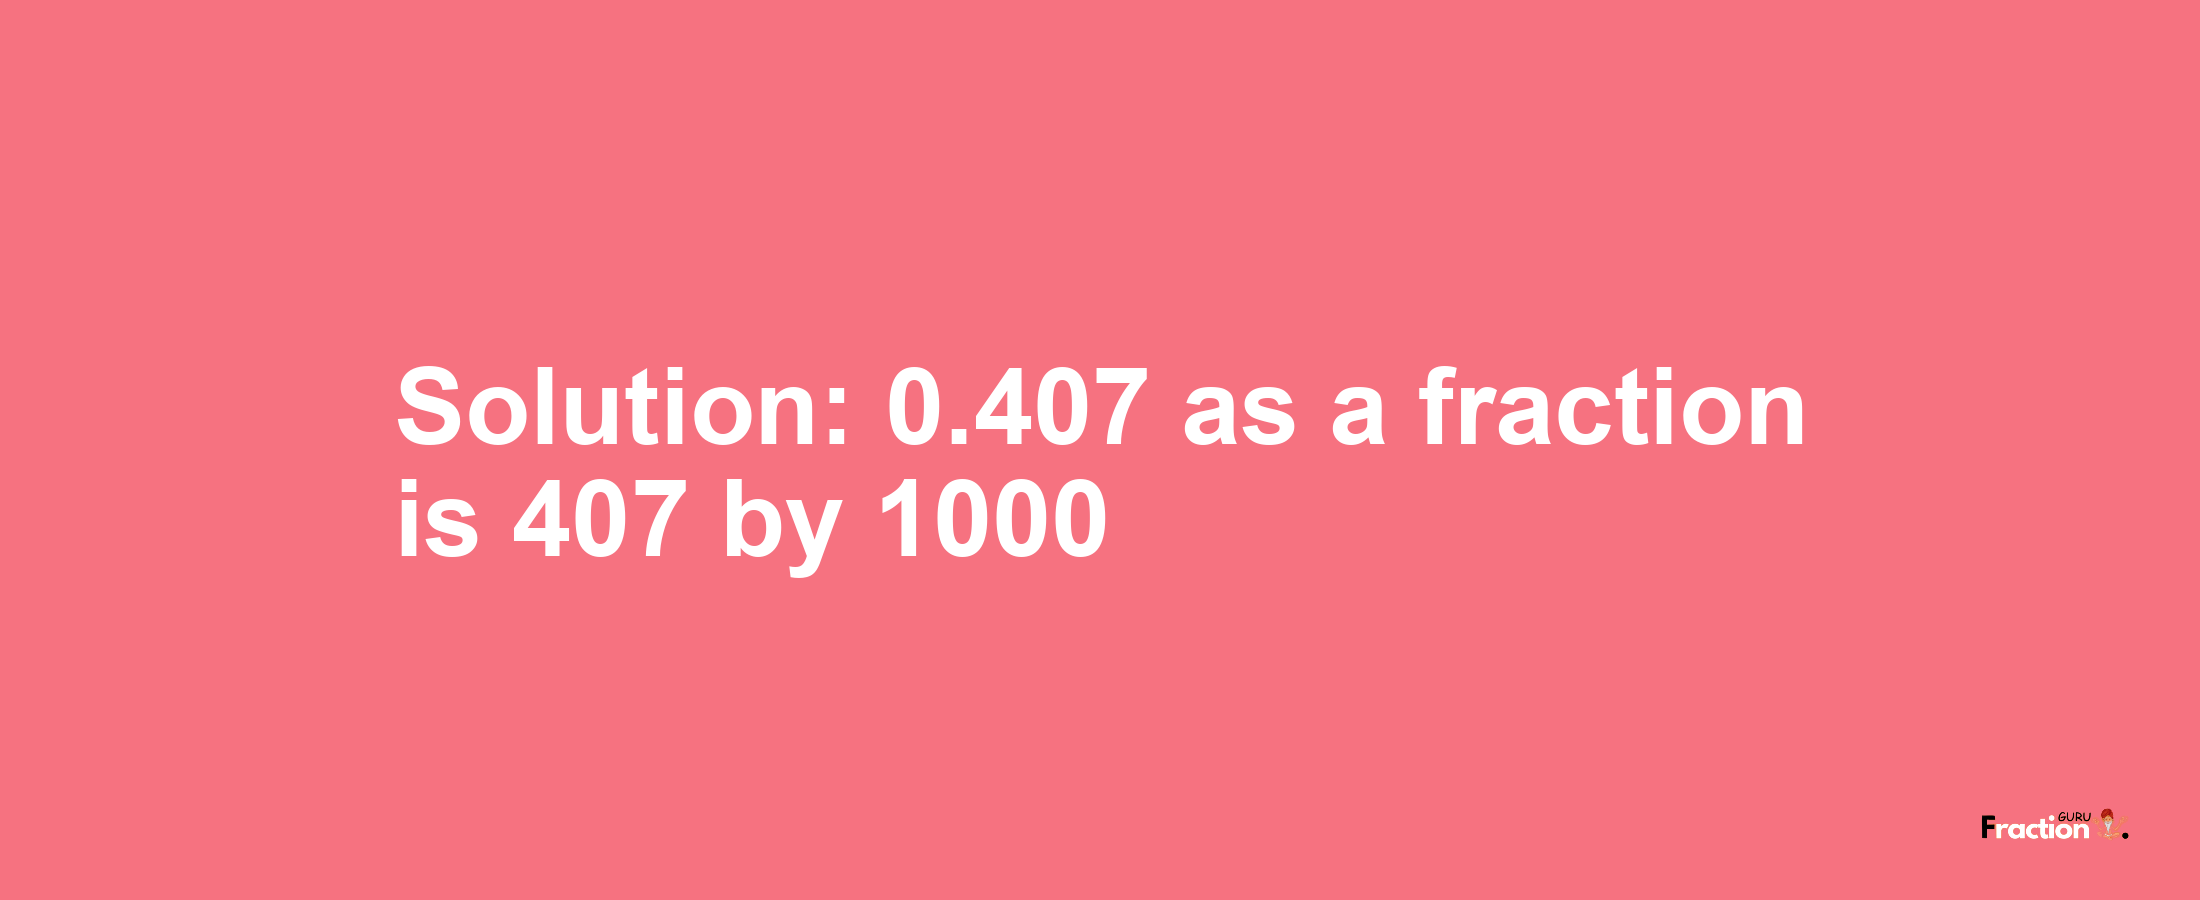 Solution:0.407 as a fraction is 407/1000